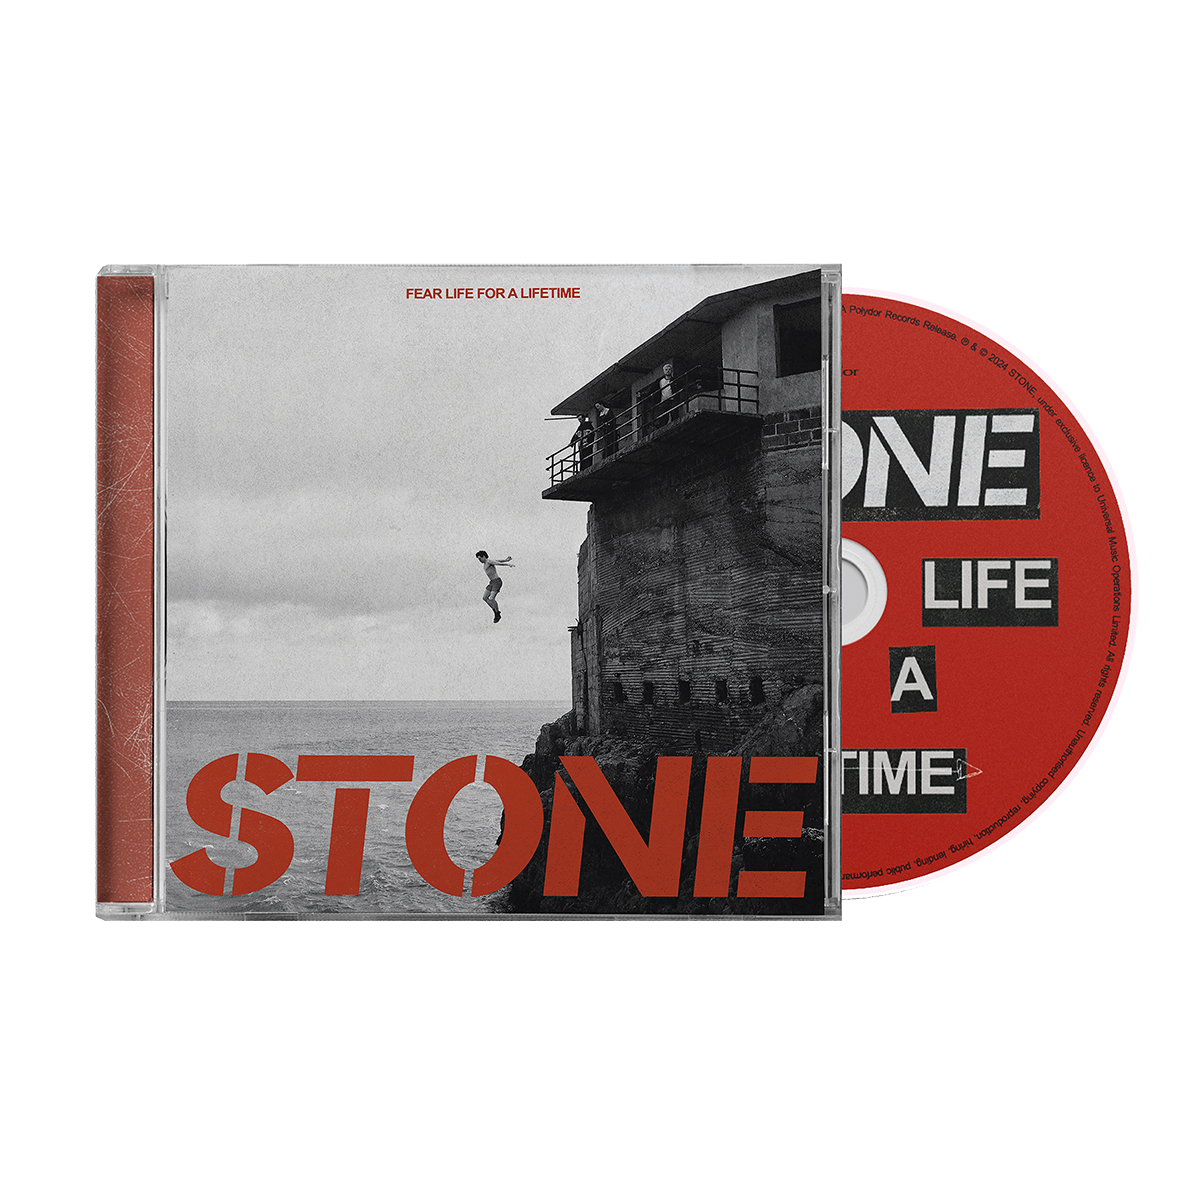 STONE - Fear Life For A Lifetime CD